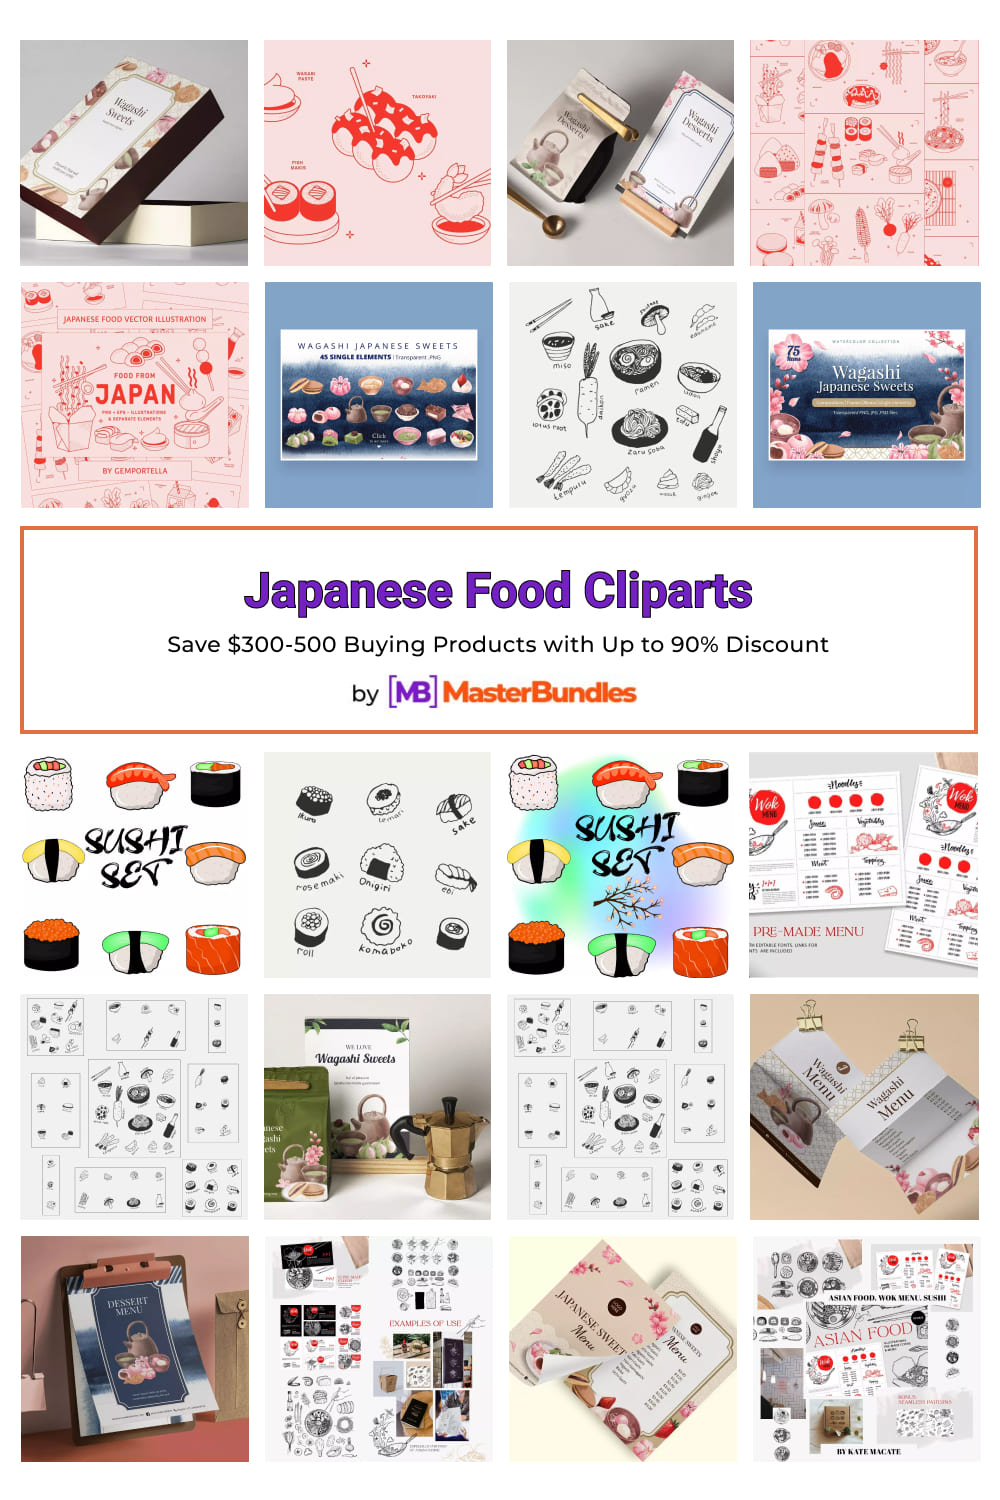 Japanese Food Cliparts for Pinterest.